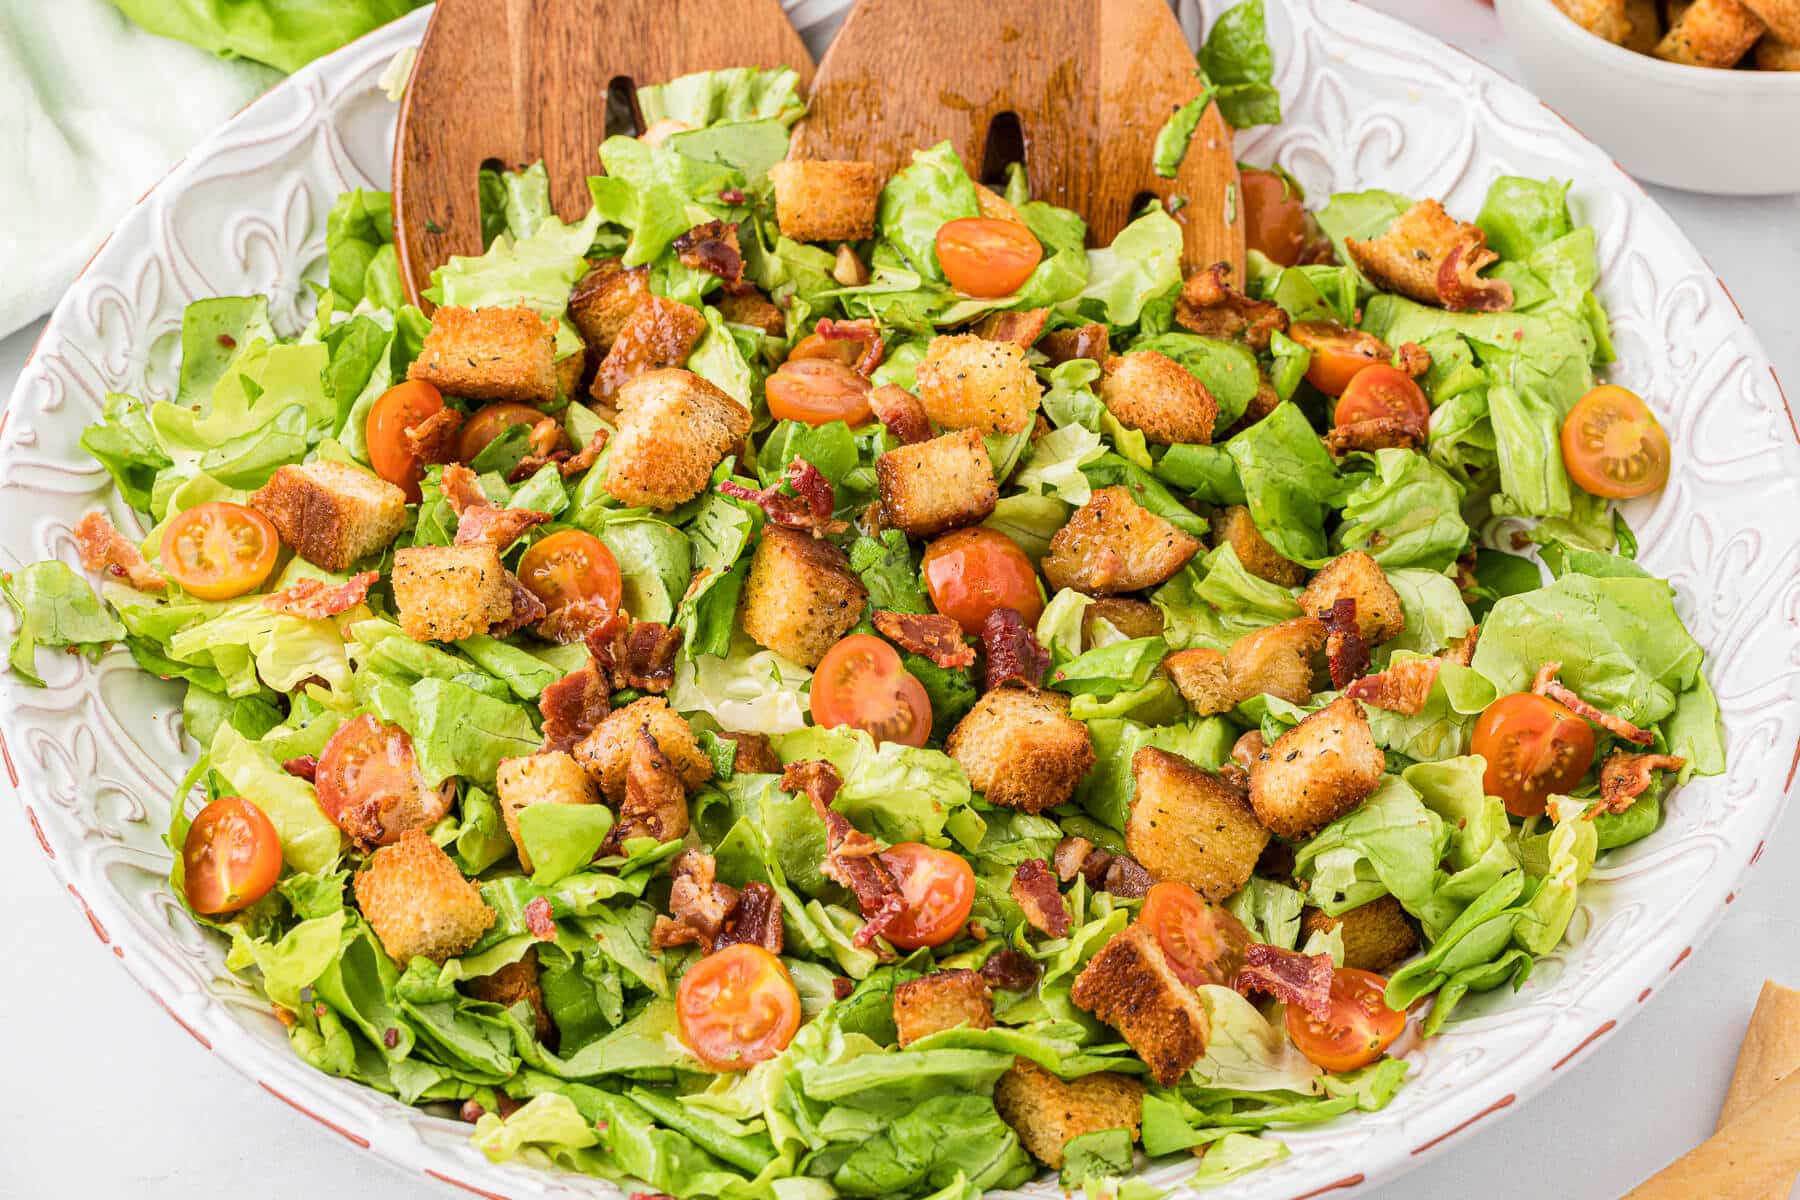 Blt salad in a bowl with wooden salad tongs.